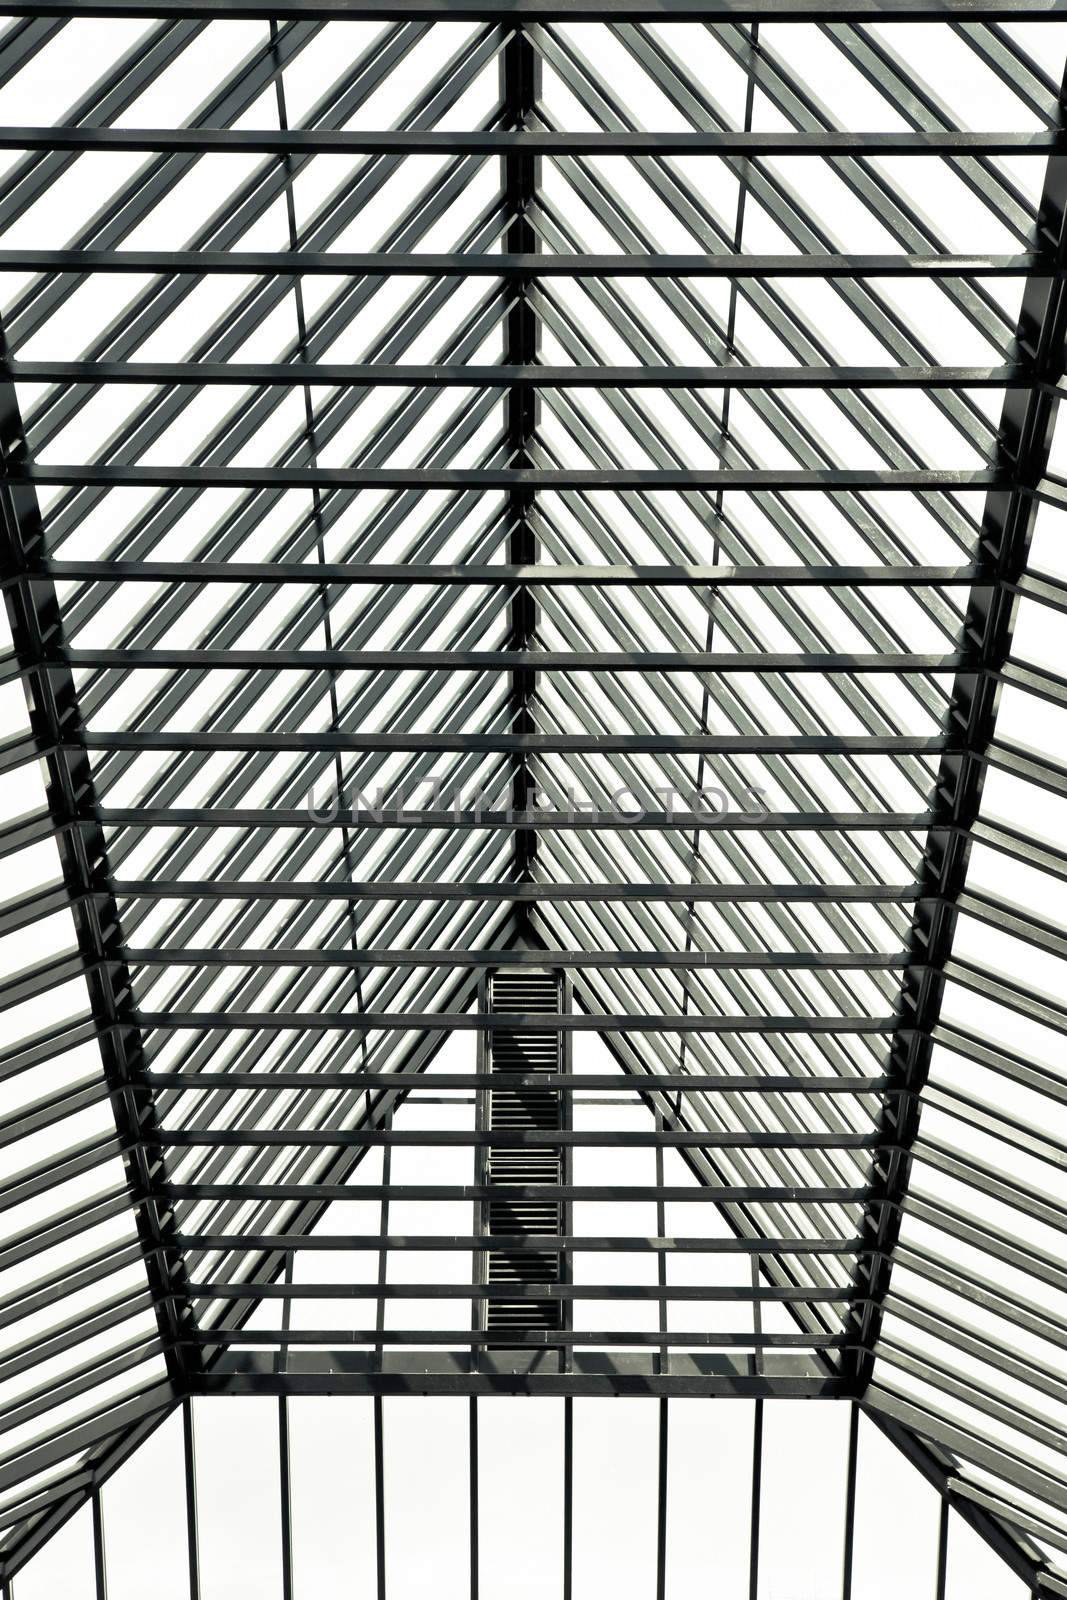 Modern glass roof in black and white tones